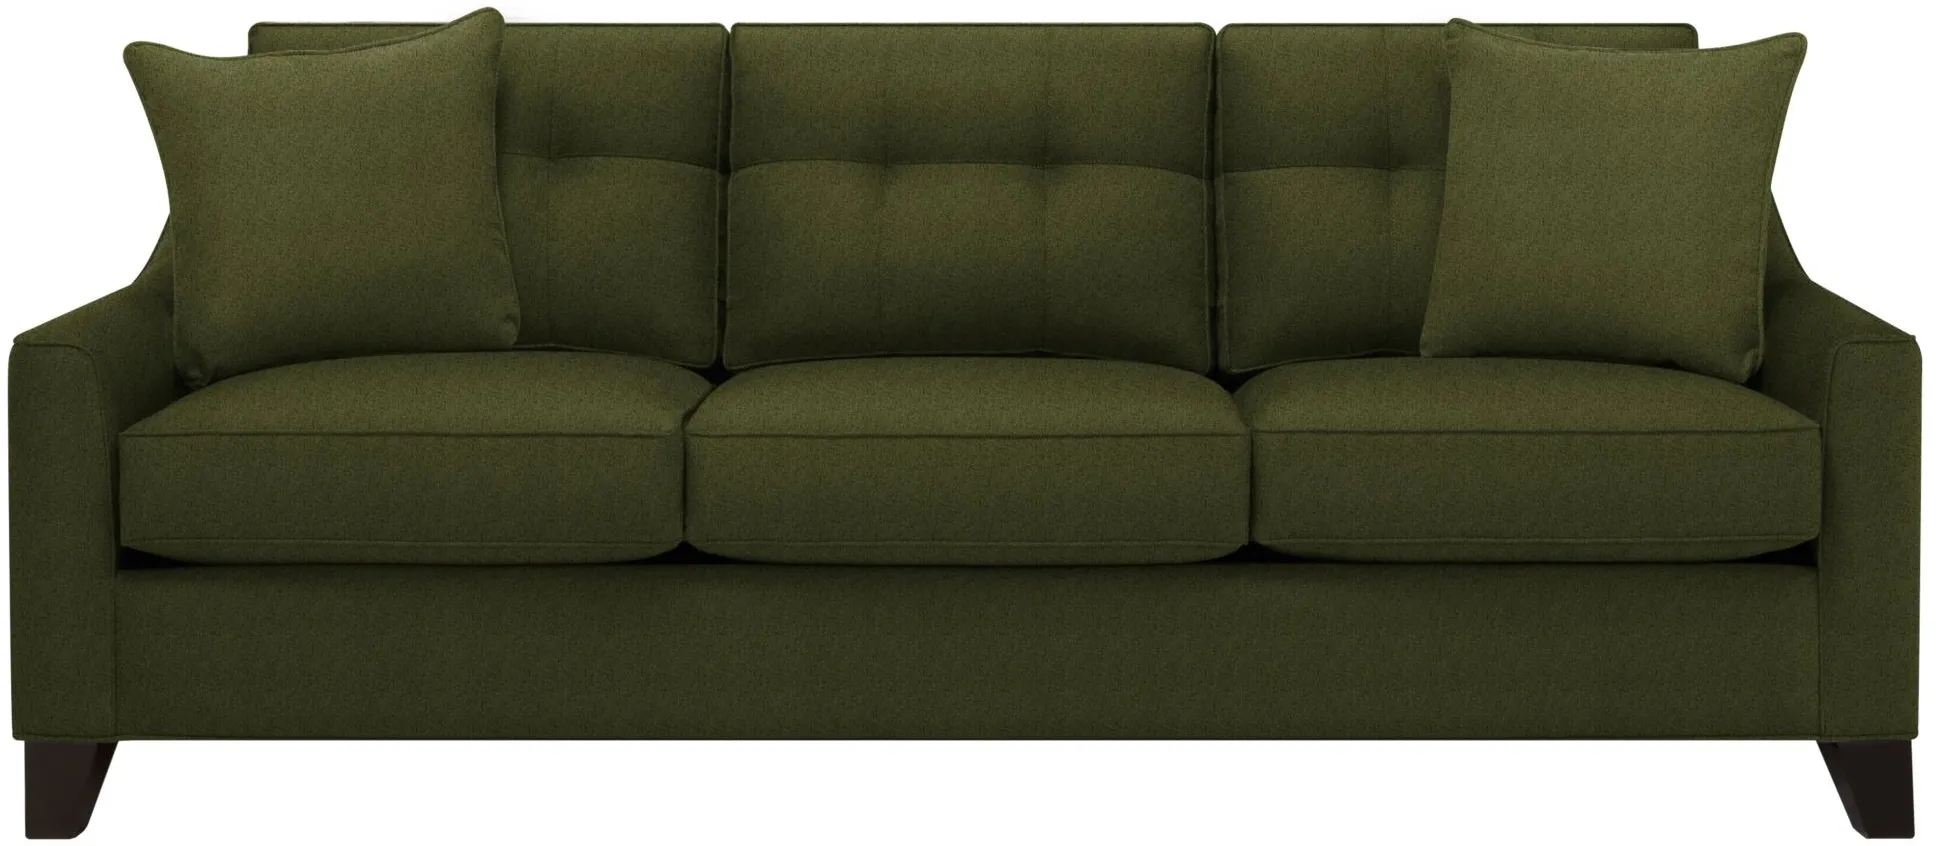 Carmine Sofa in Suede so Soft Pine by H.M. Richards